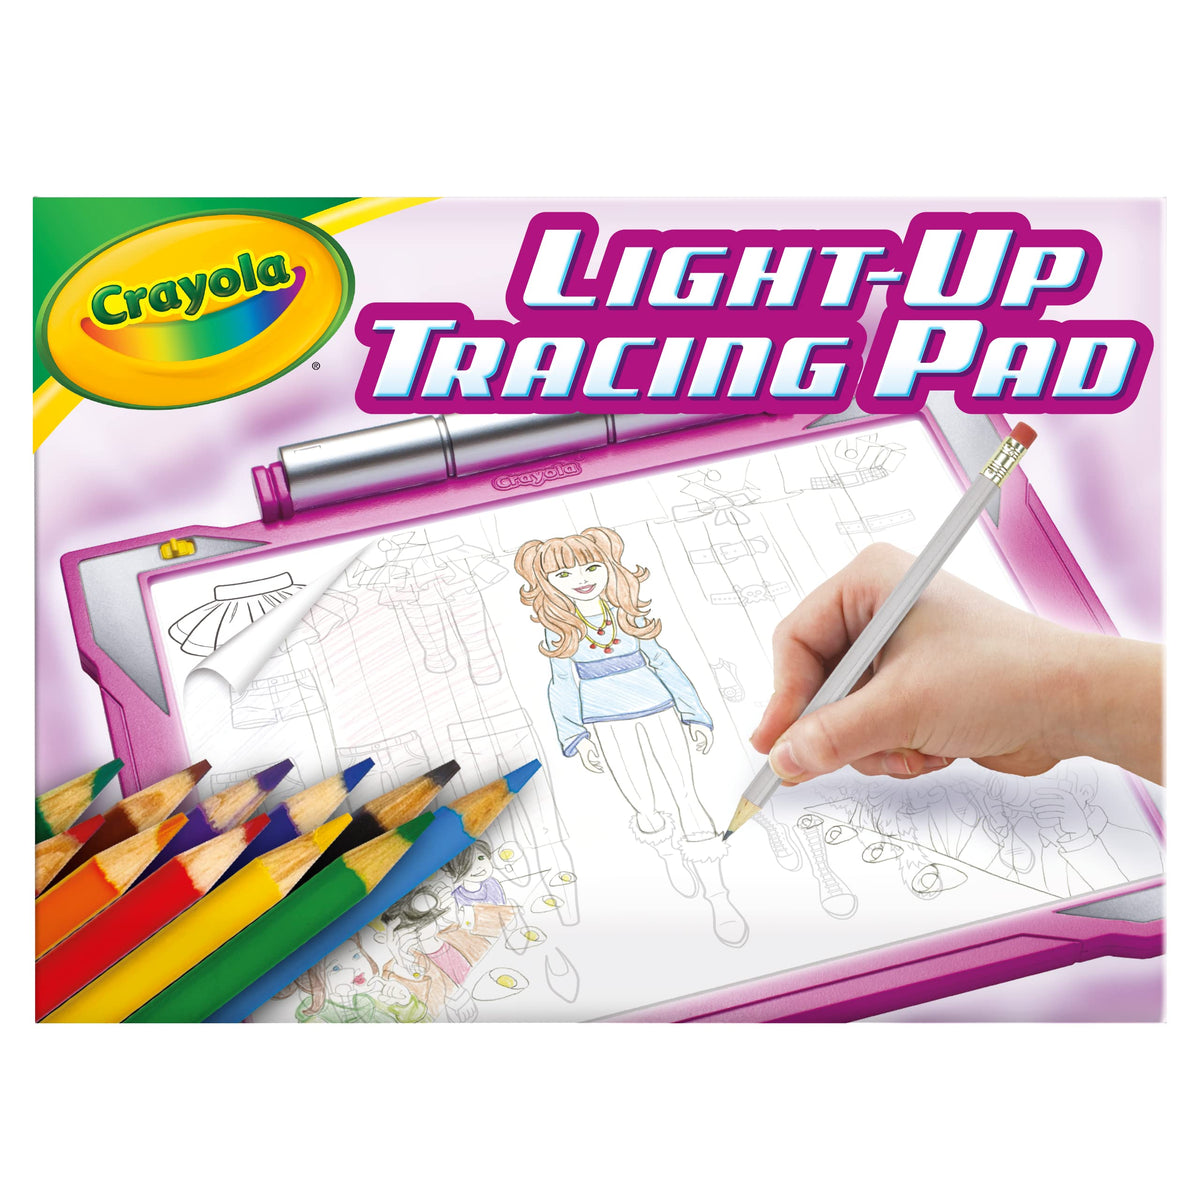 Crayola Trolls Light Up Tracing Pad, Drawing Toys, Gifts for Boys & Girls,  Age 6+